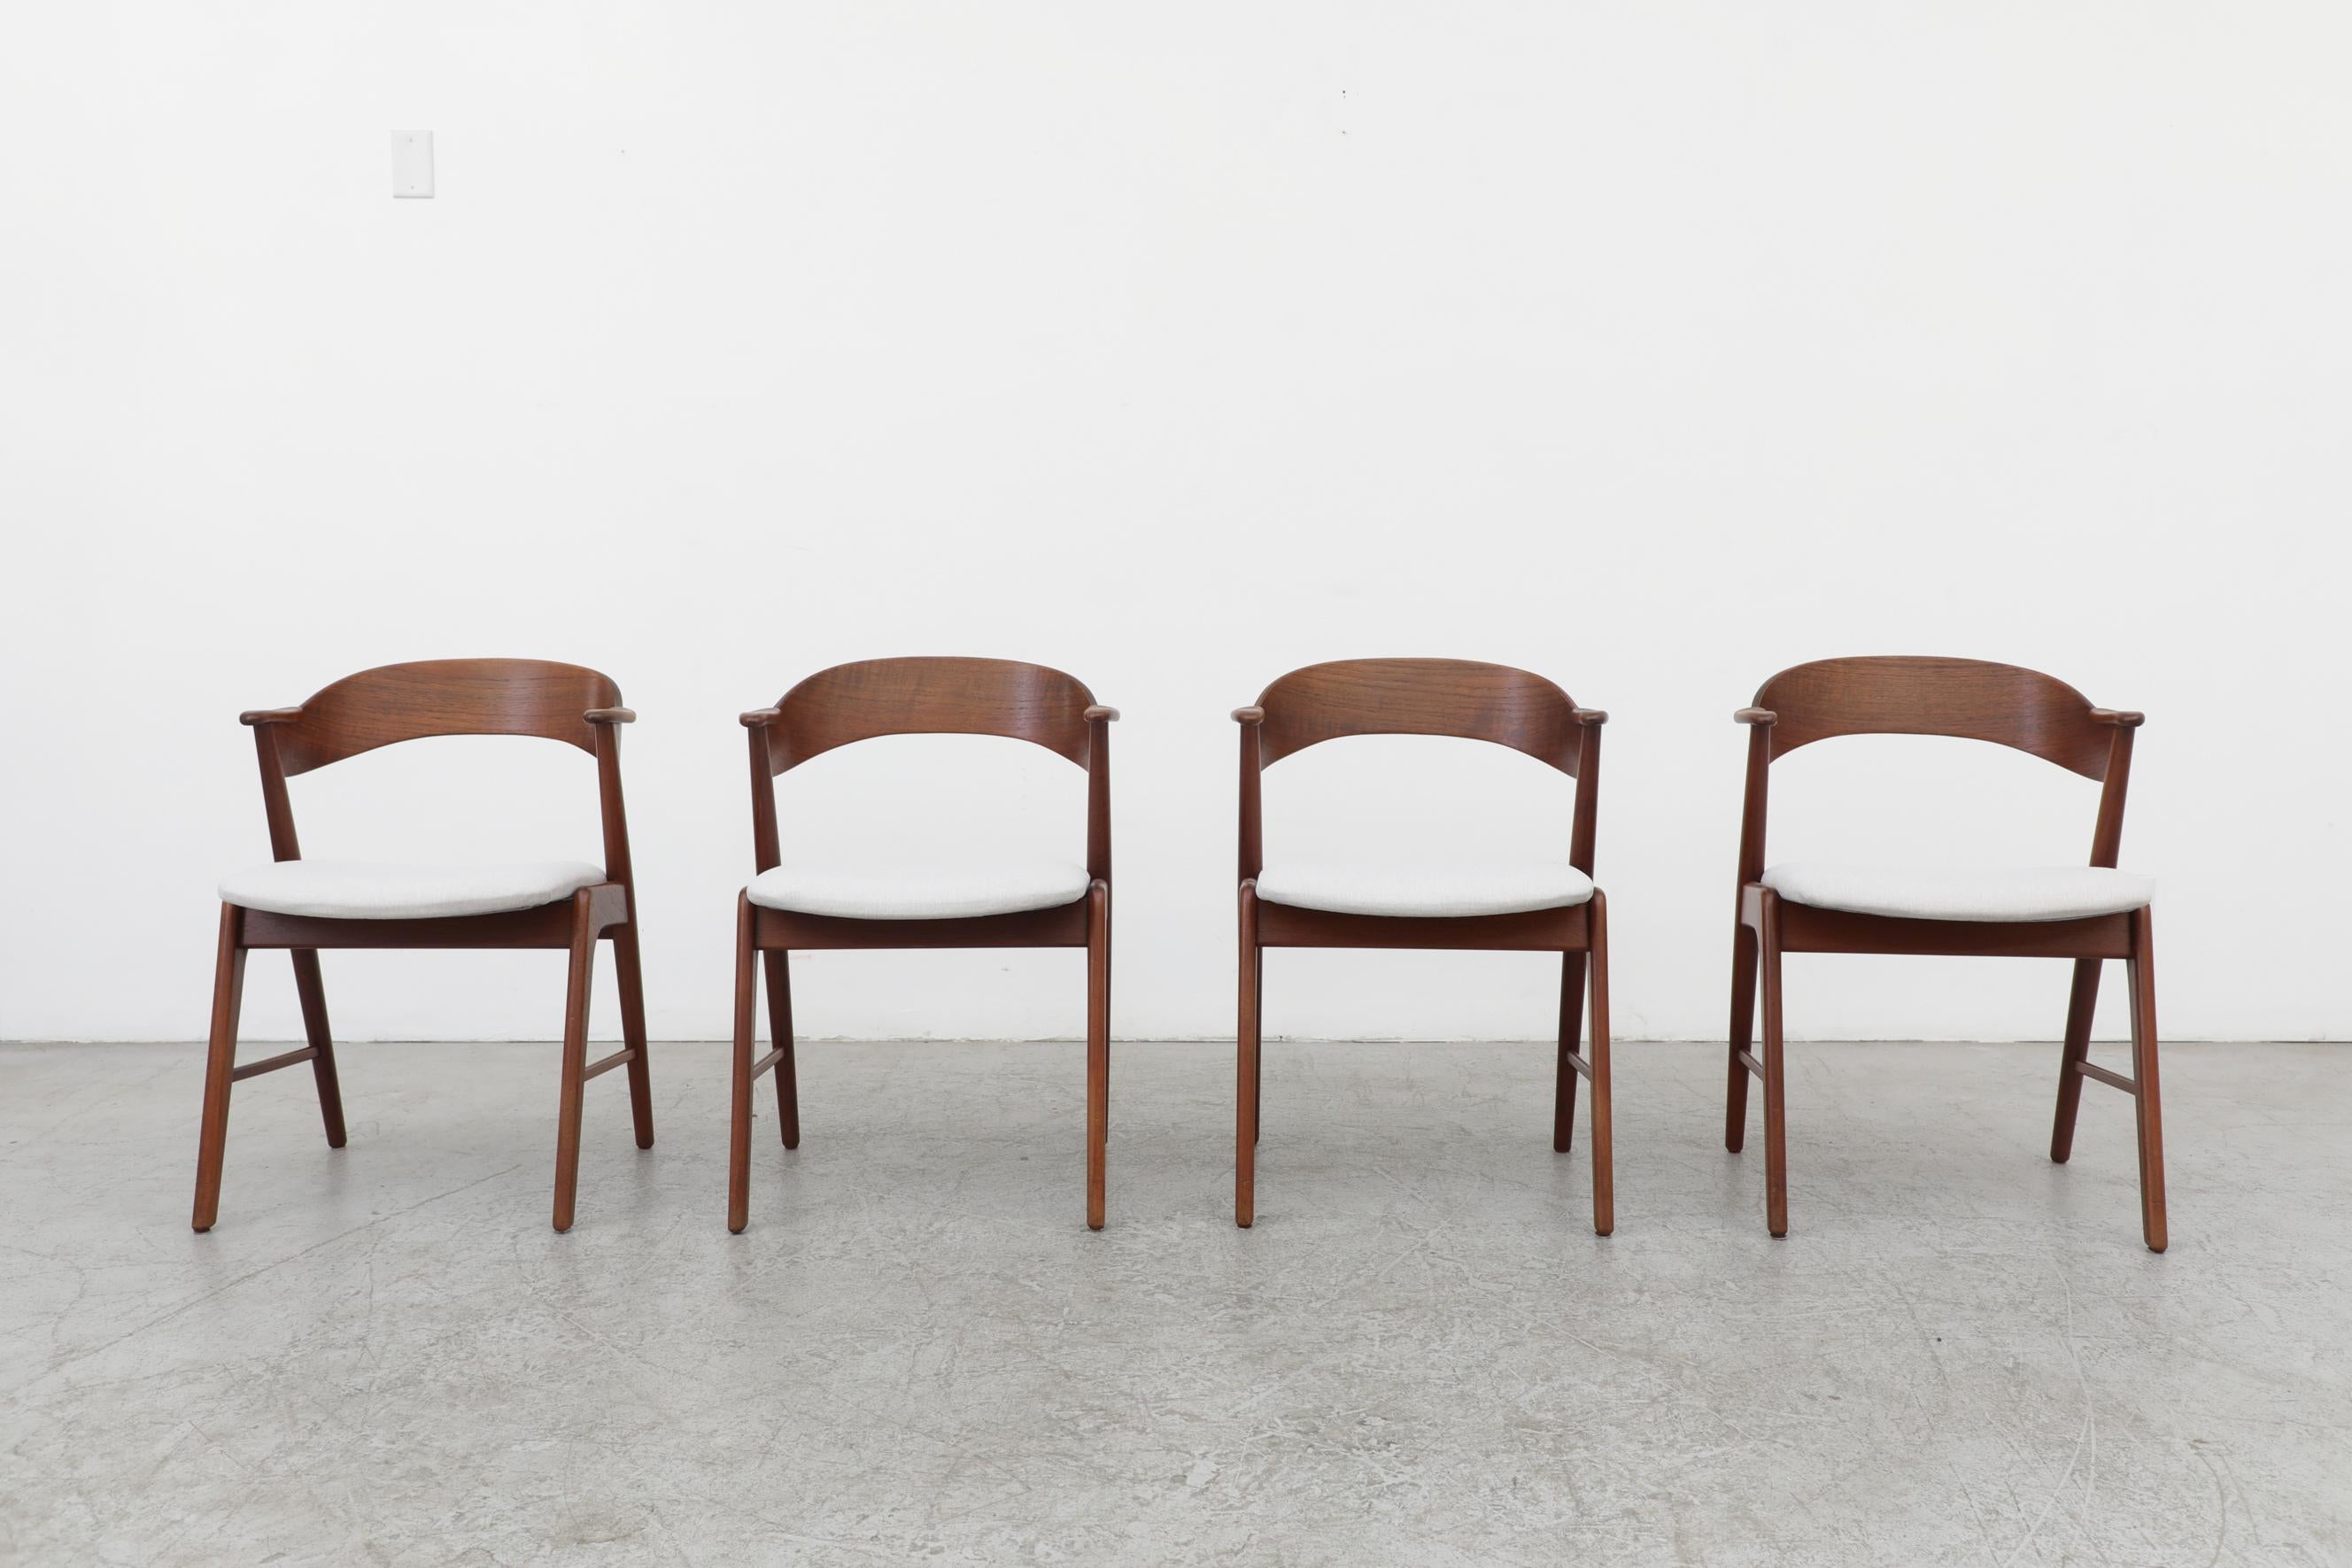 Rare set of 4 model 32 Kai Kristiansen chairs for Schou Anderson, 1960s. Set of 4 dining chairs with teak frames and curved ribbon-like seat backs. Frames are in good original condition with some sun fading to the teak and newer upholstery from